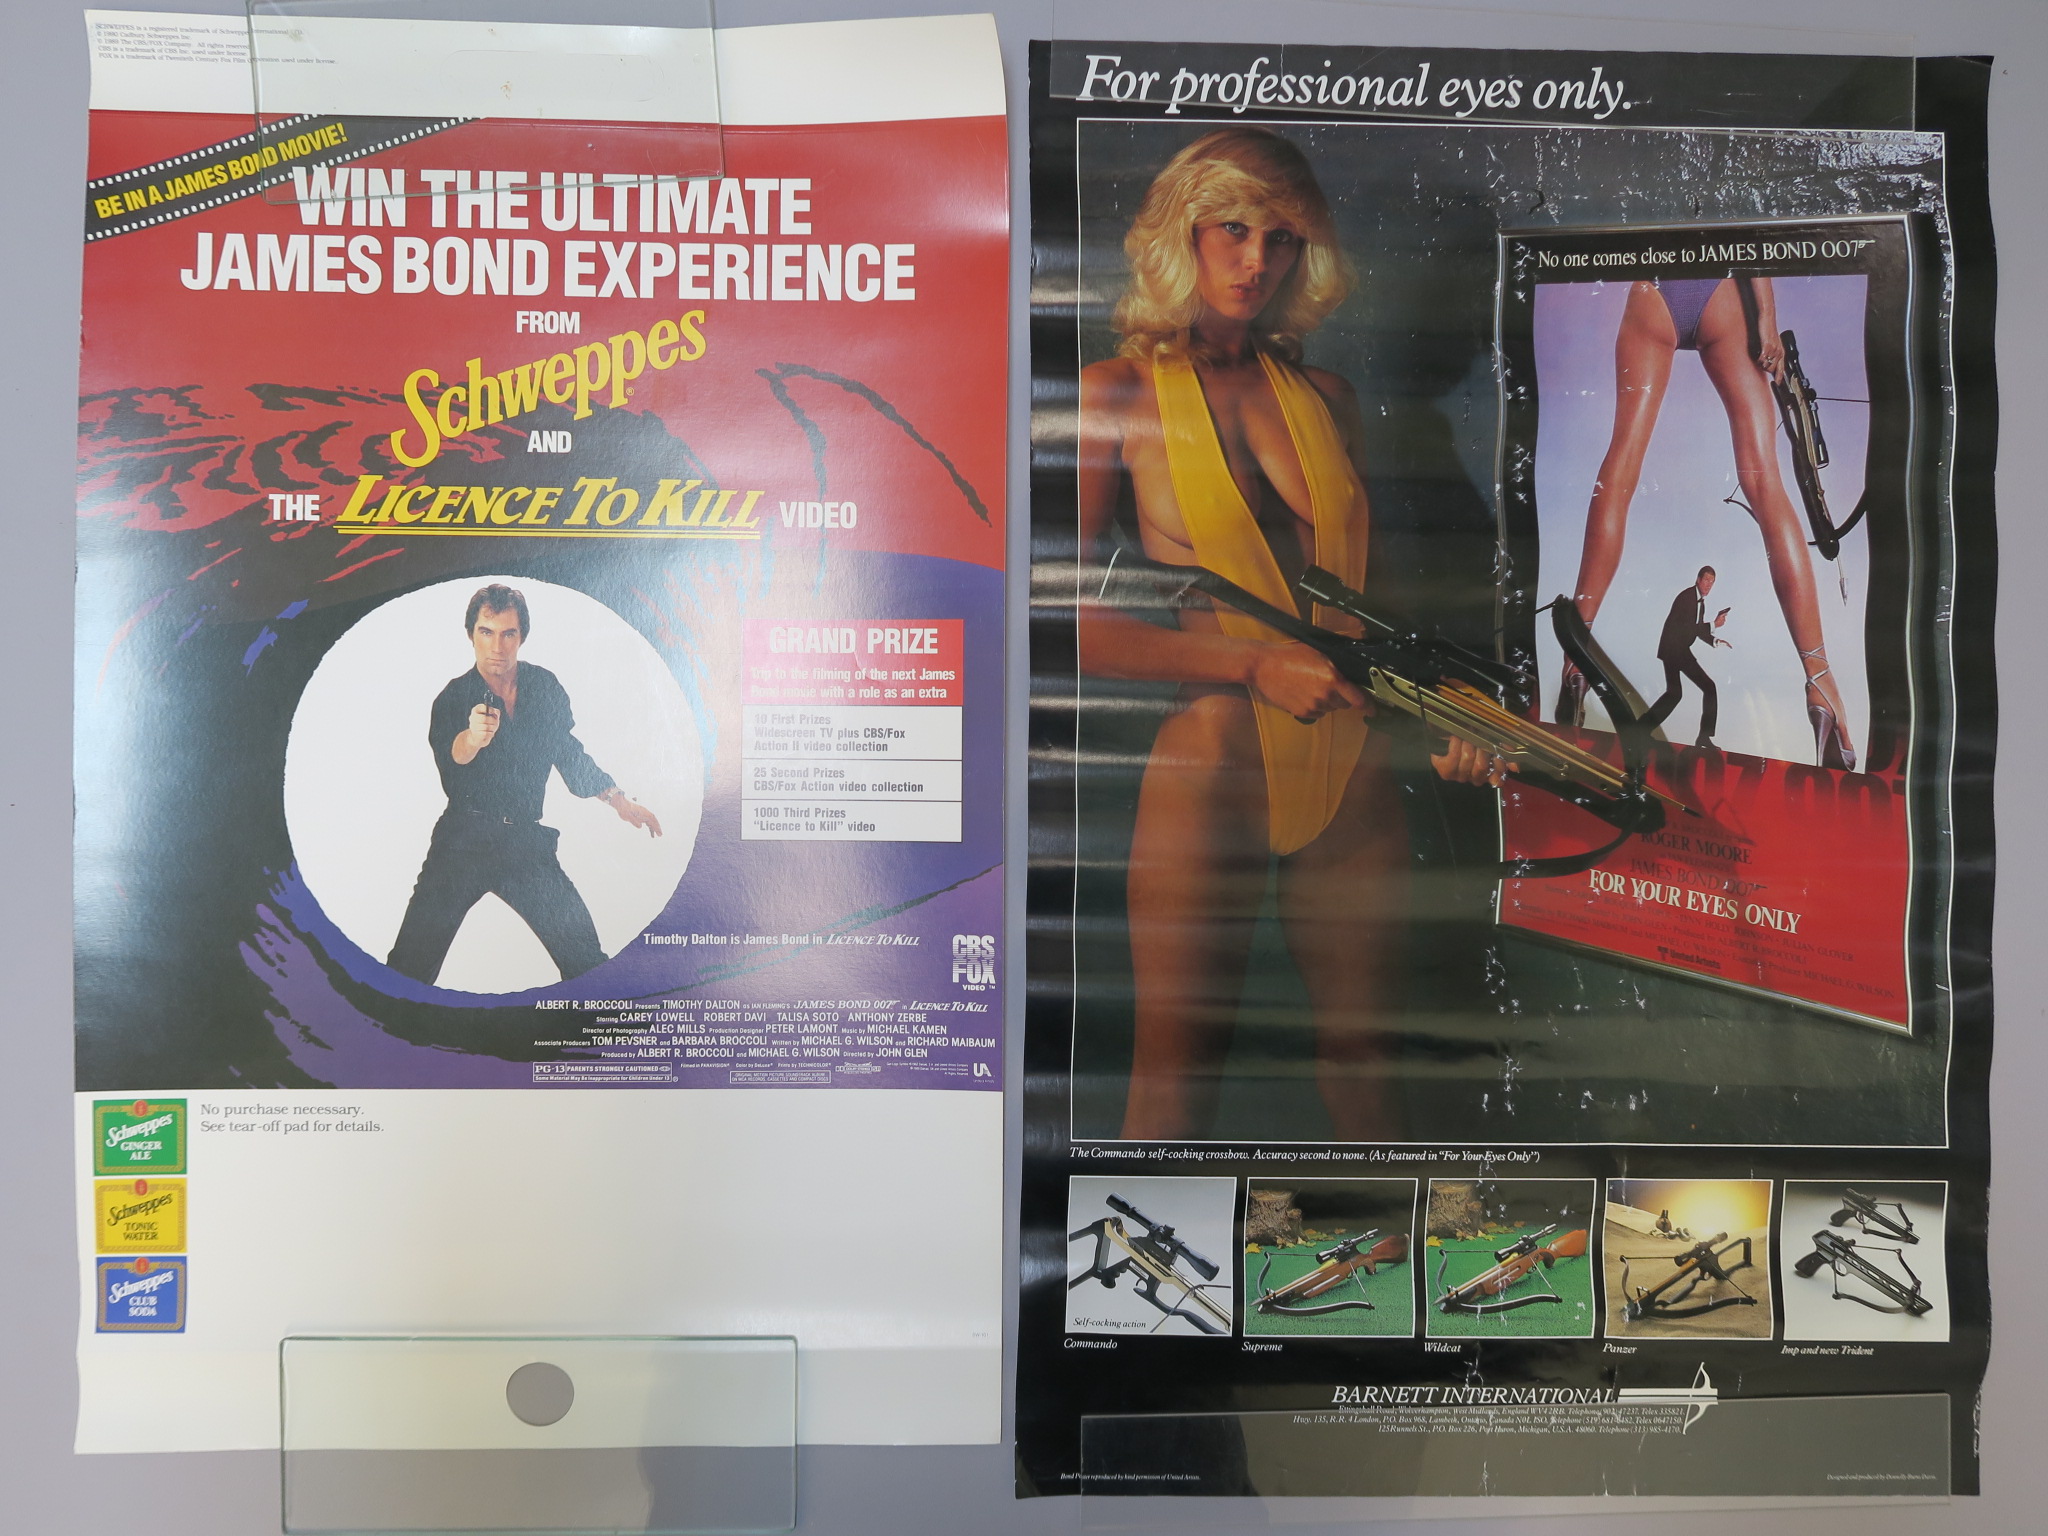 James Bond promotional posters including Schweppes Licence to Kill competition video poster